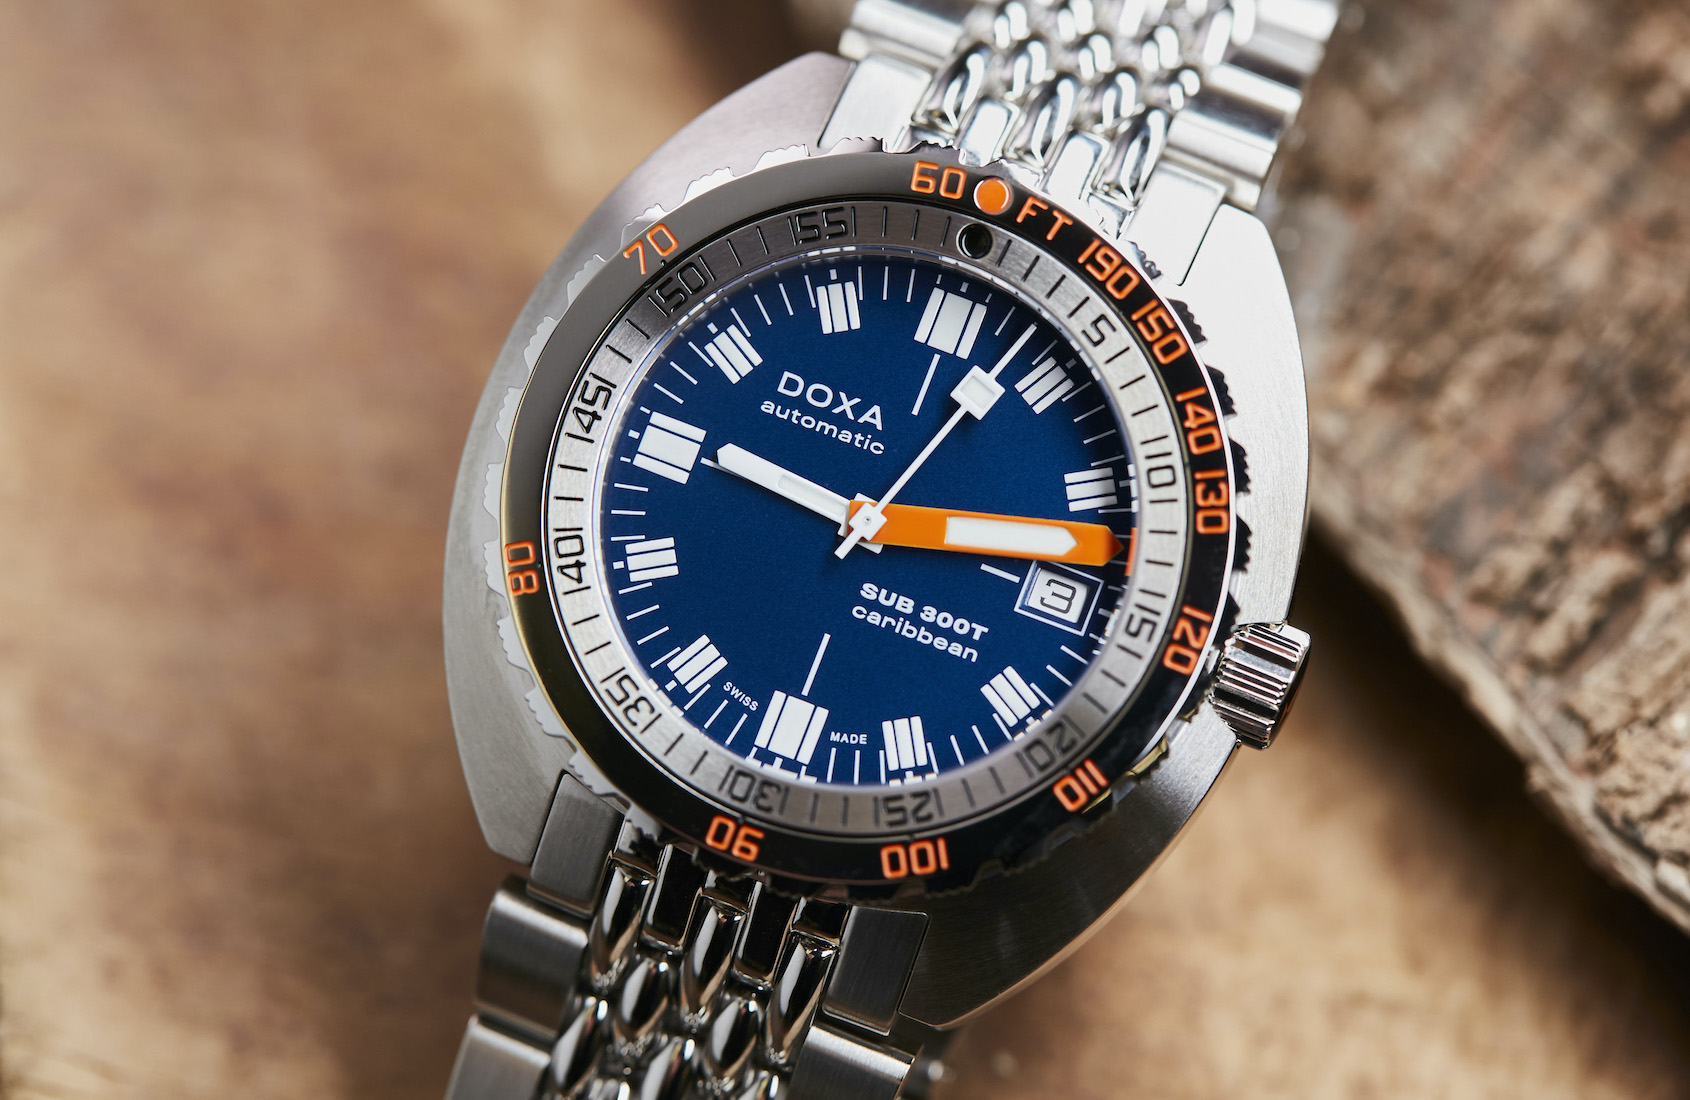 IN-DEPTH: The DOXA SUB 300T, the dive watch icon that takes you 1200m ...